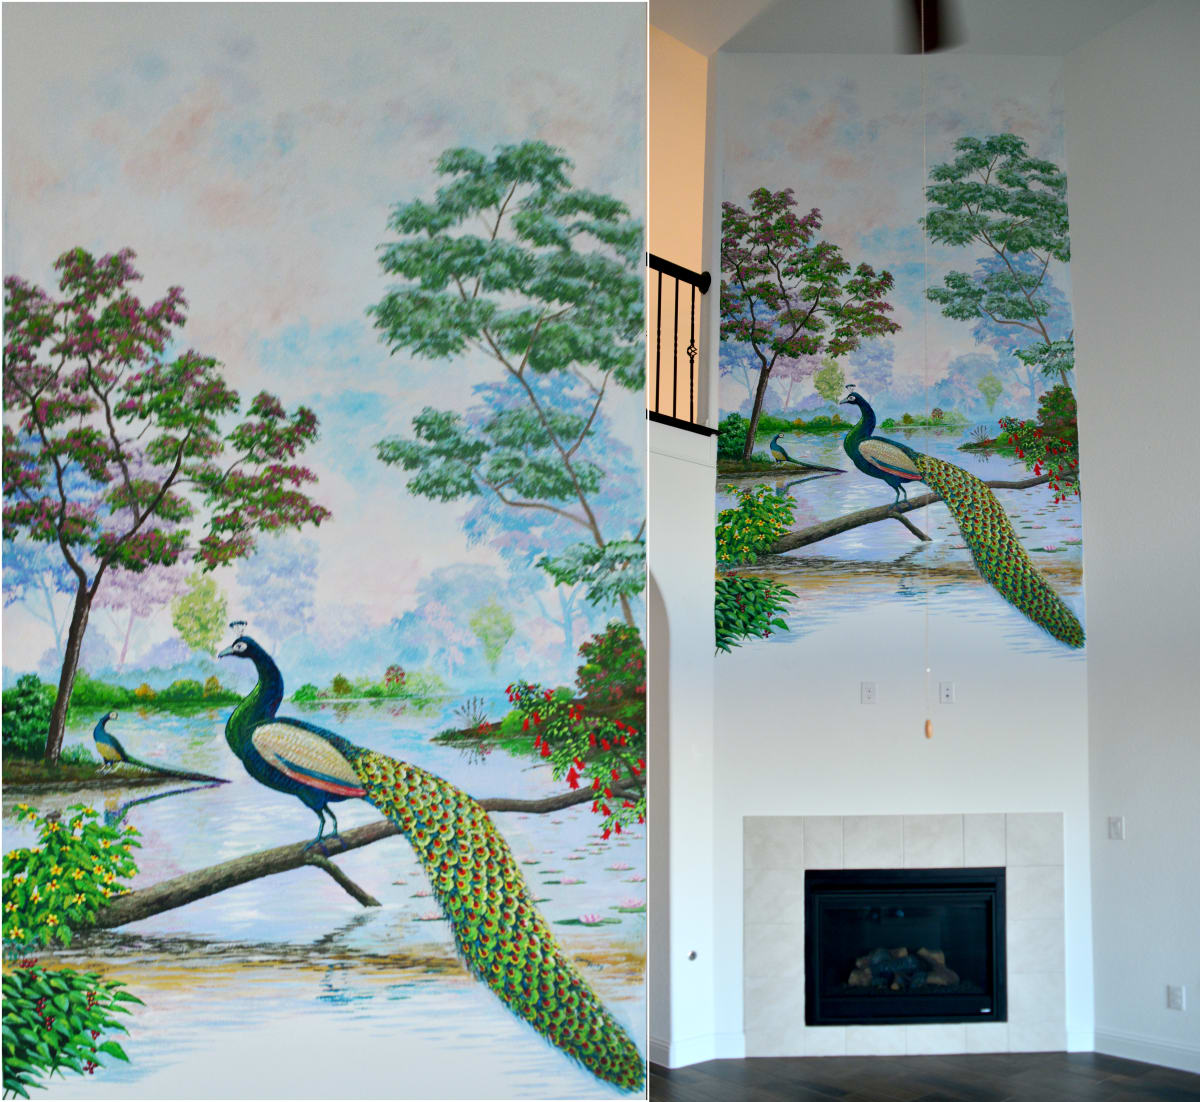 peacock mural by Dan Terry  Image: Commissioned to create a floral peacock themed mural in a private home near Austin, Dan created this colorful and peaceful view of peacocks in a placid lake scene. 